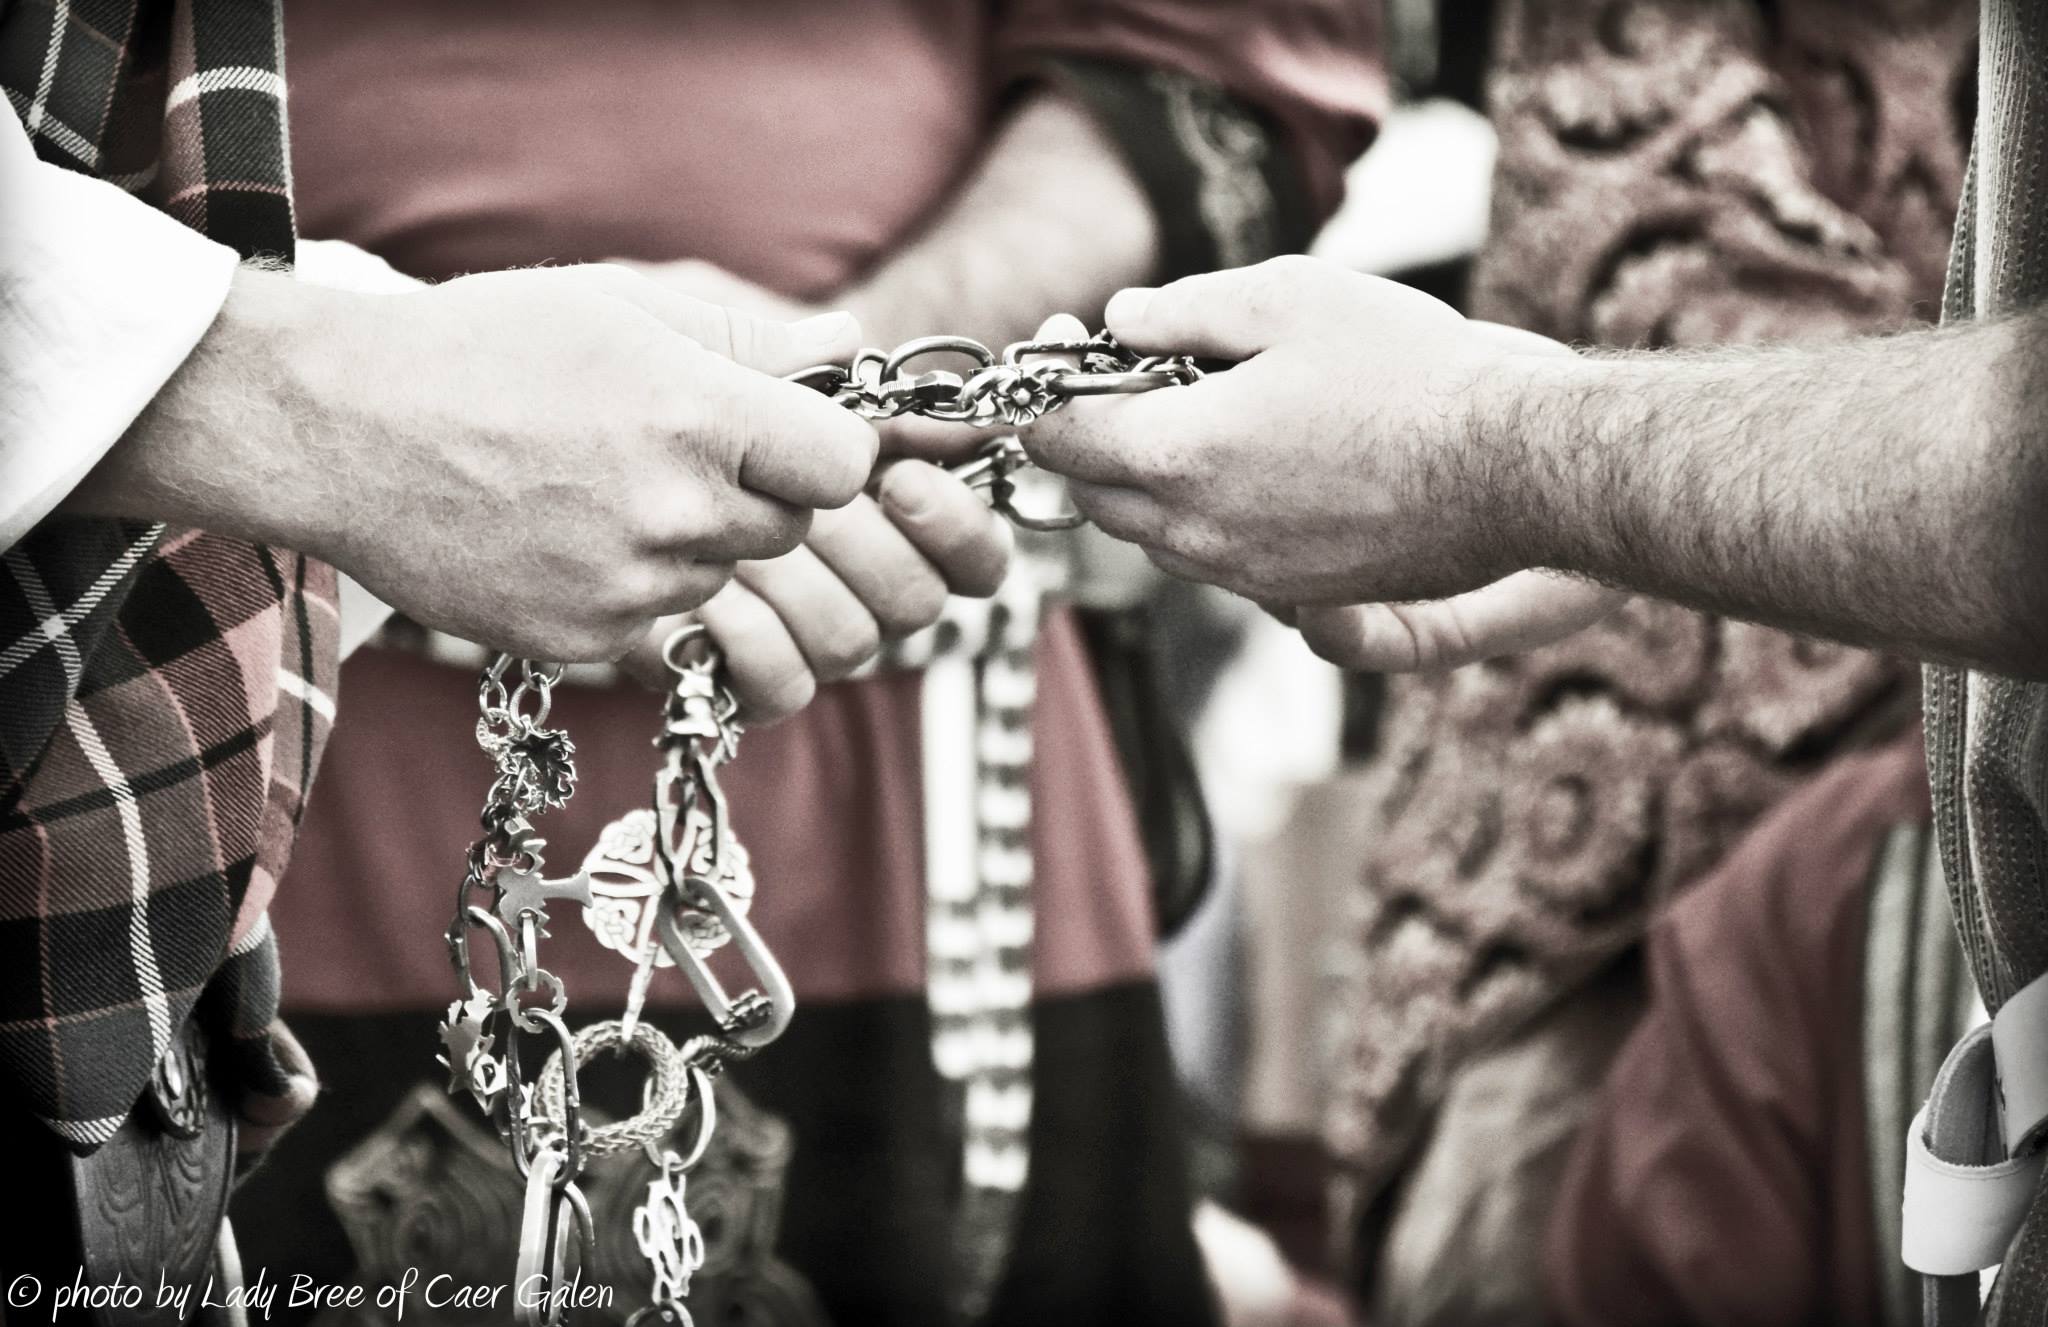 Two pairs of hands holding a decorative chain